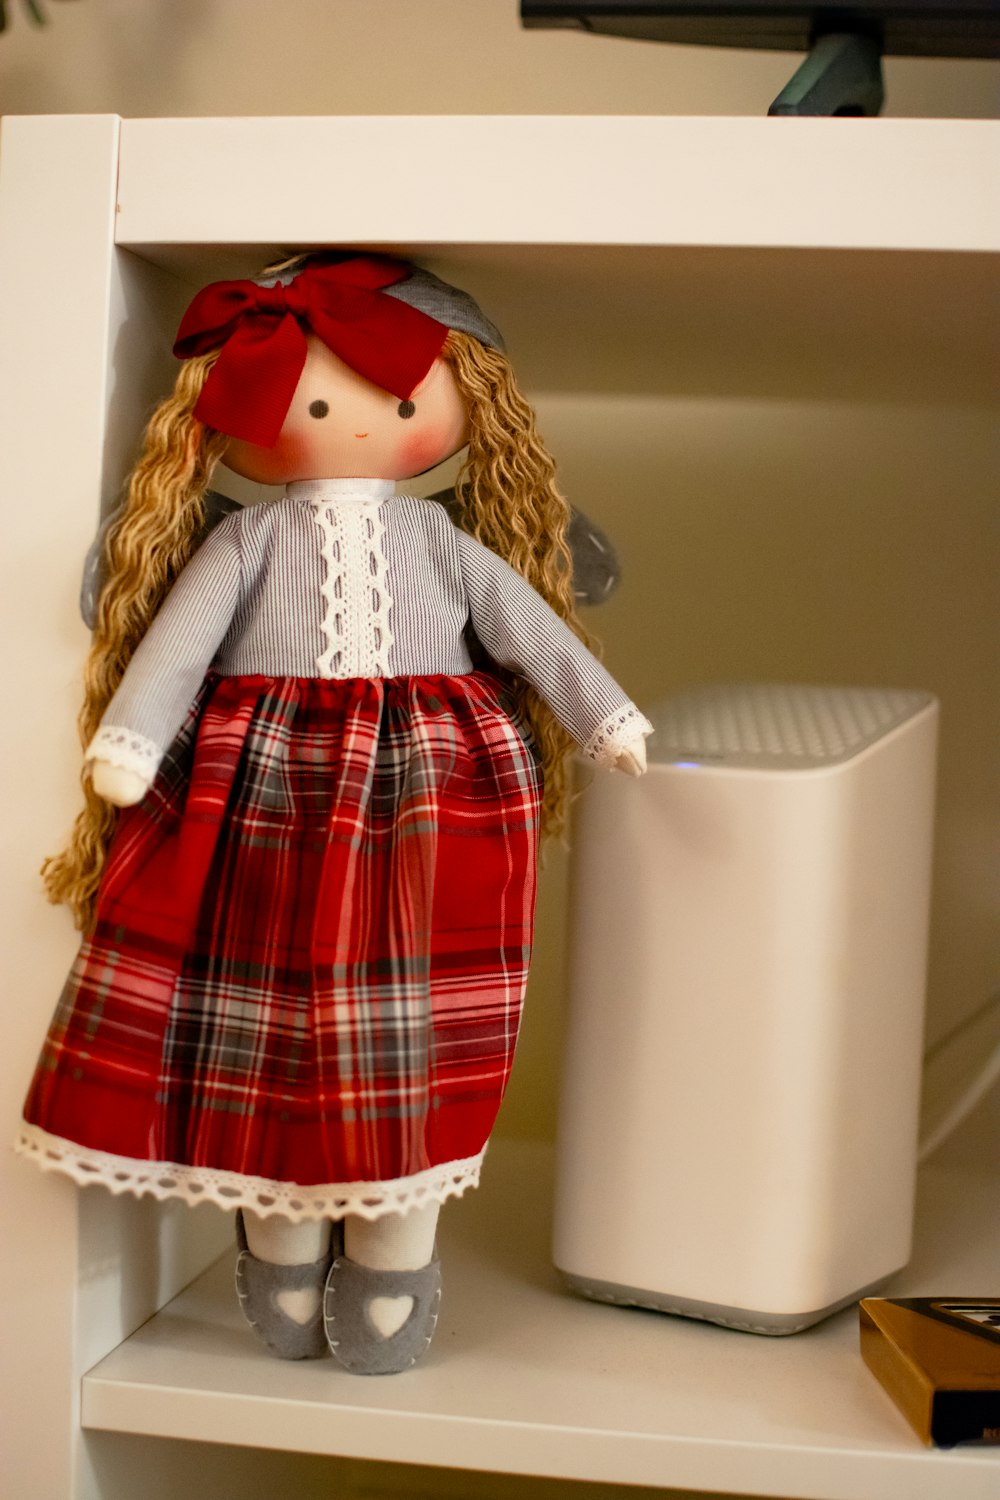 a doll is sitting on a shelf next to a trash can